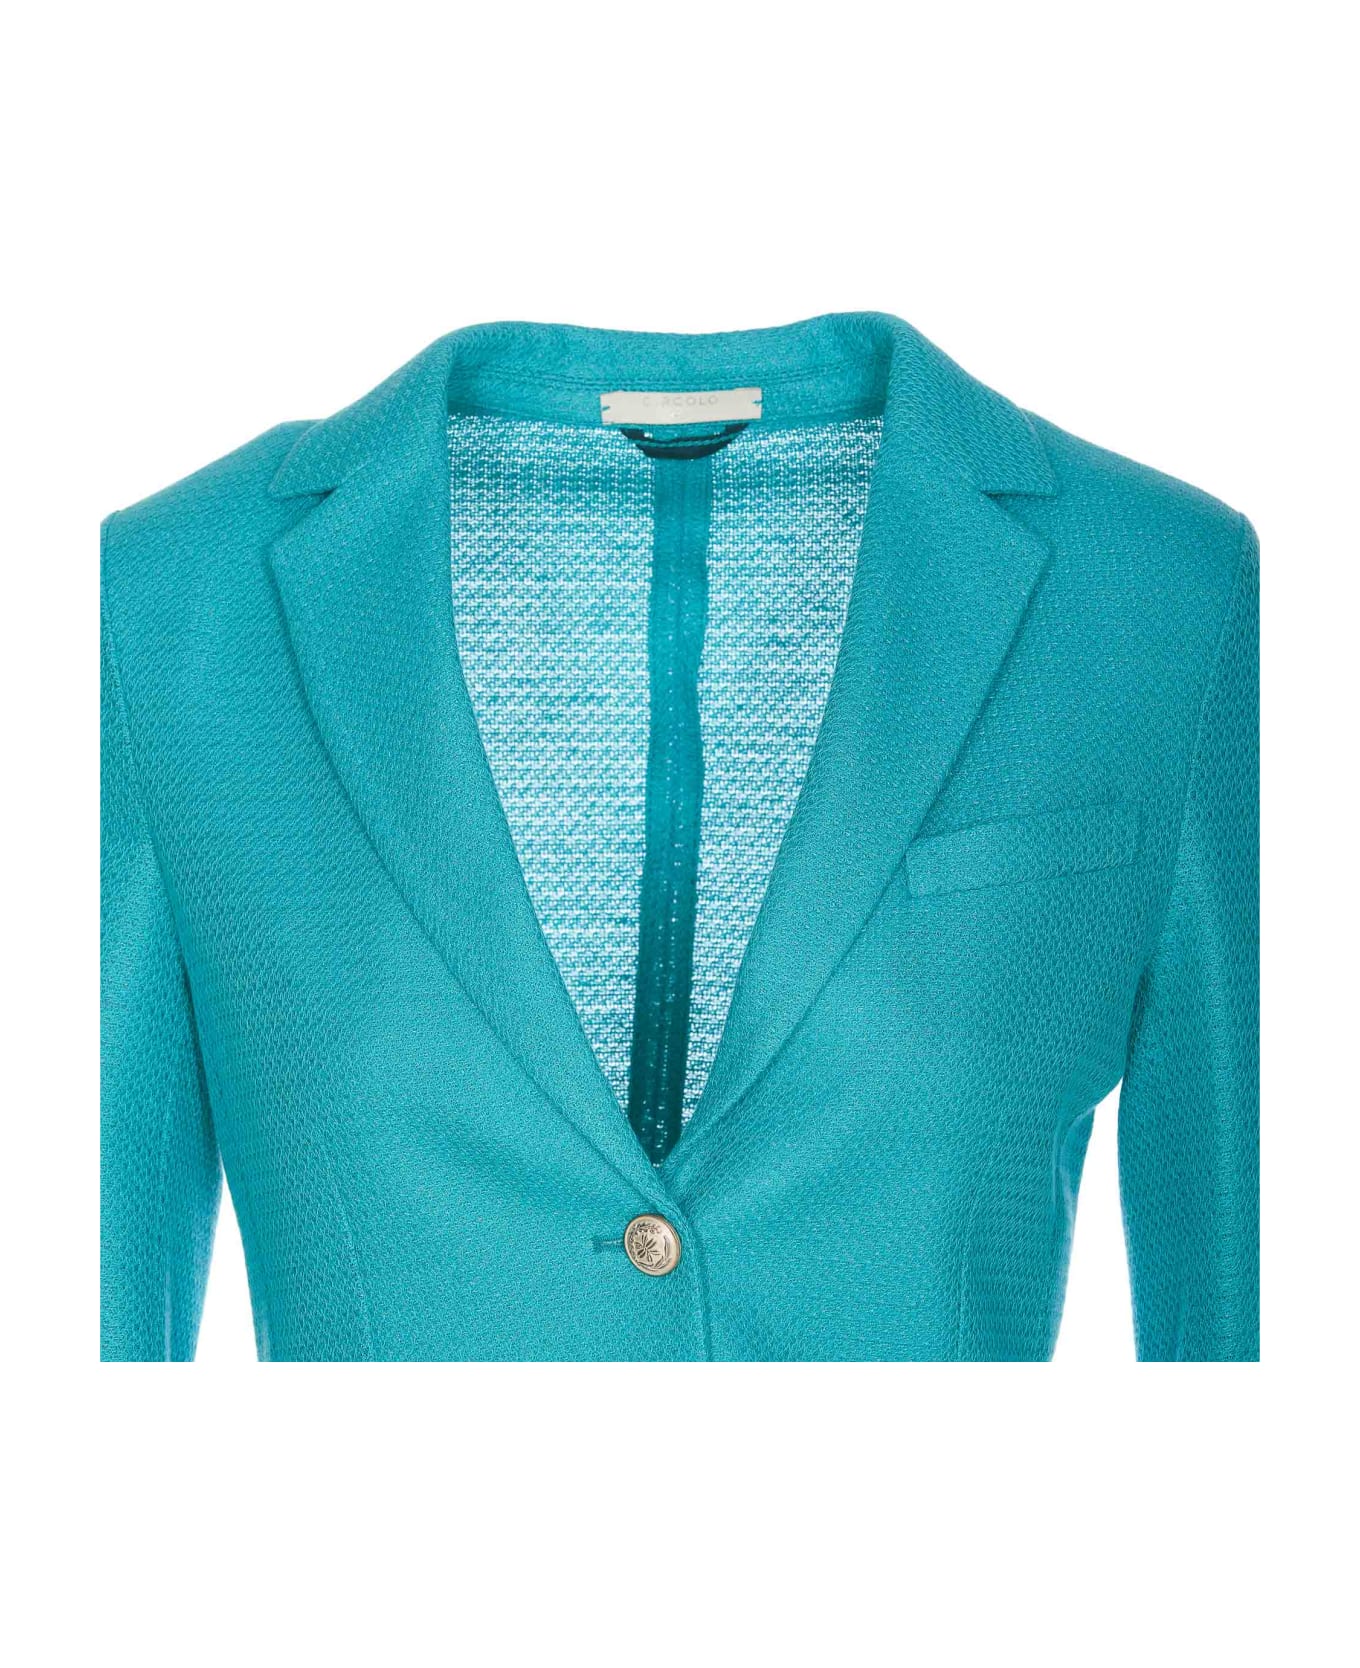 Circolo 1901 Single Breasted Buttons Jacket - Green